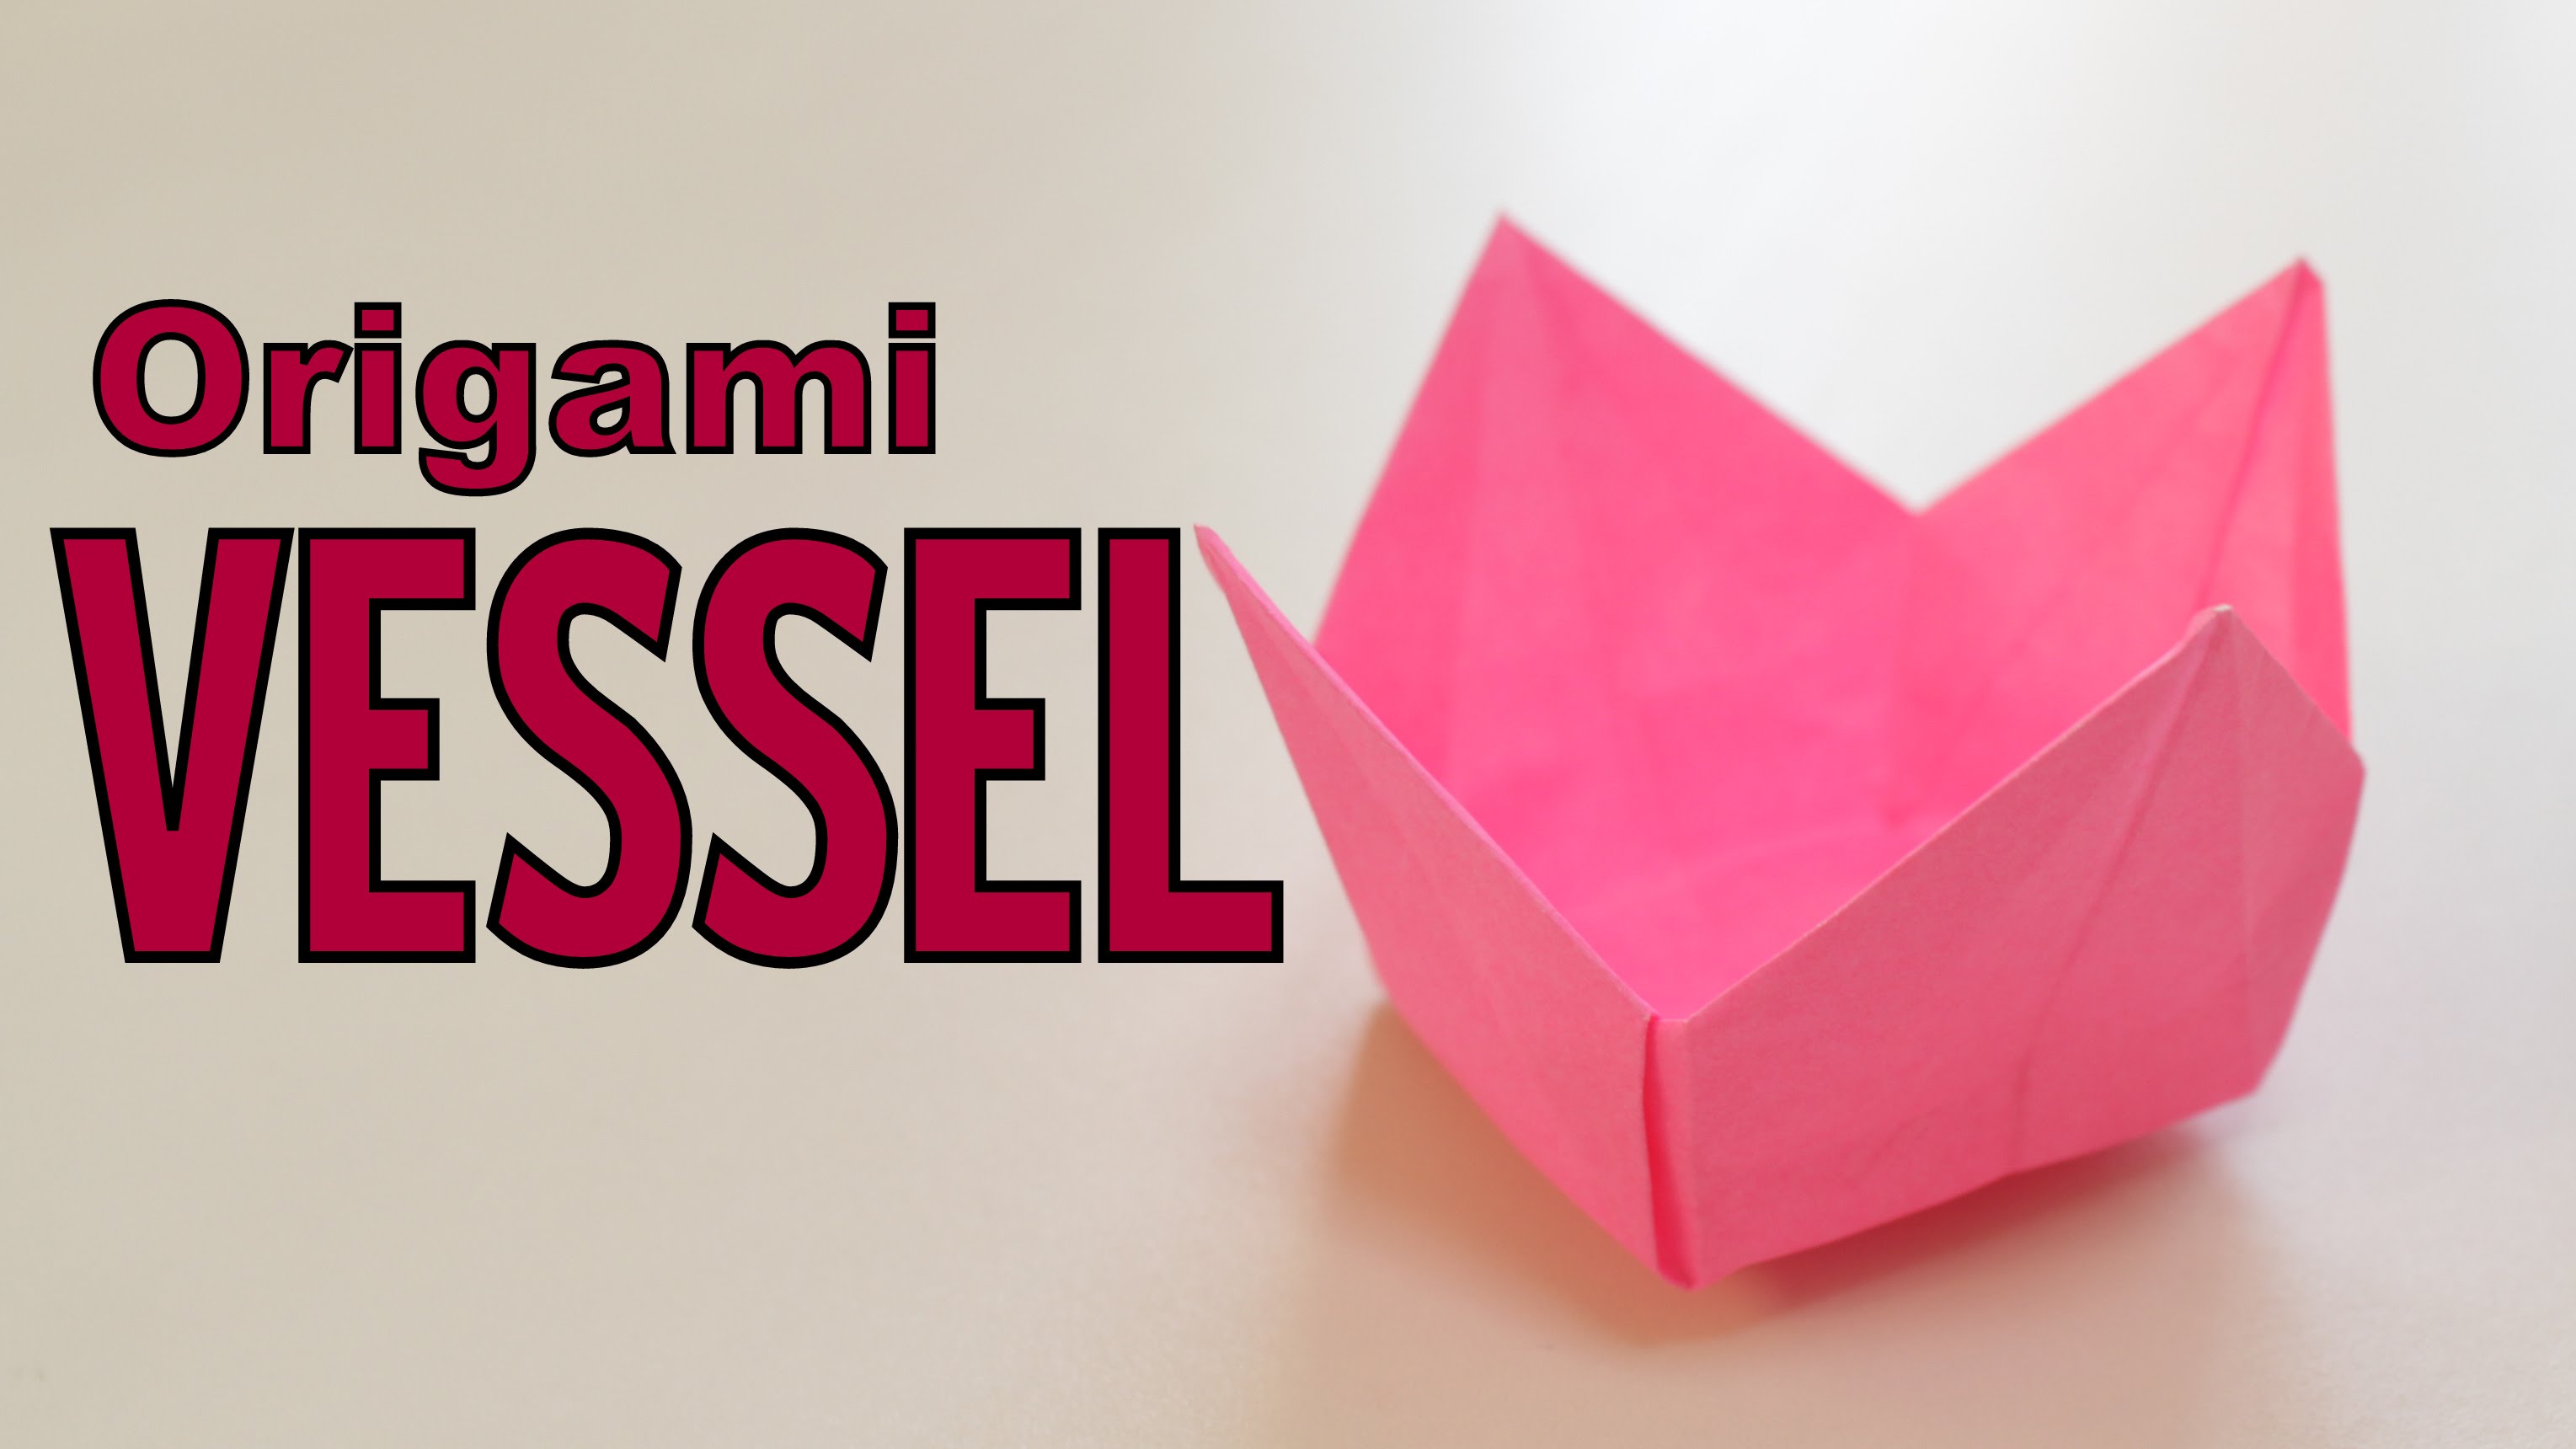 Origami - How to make a VESSEL (for candies, flowers etc.) - YouTube